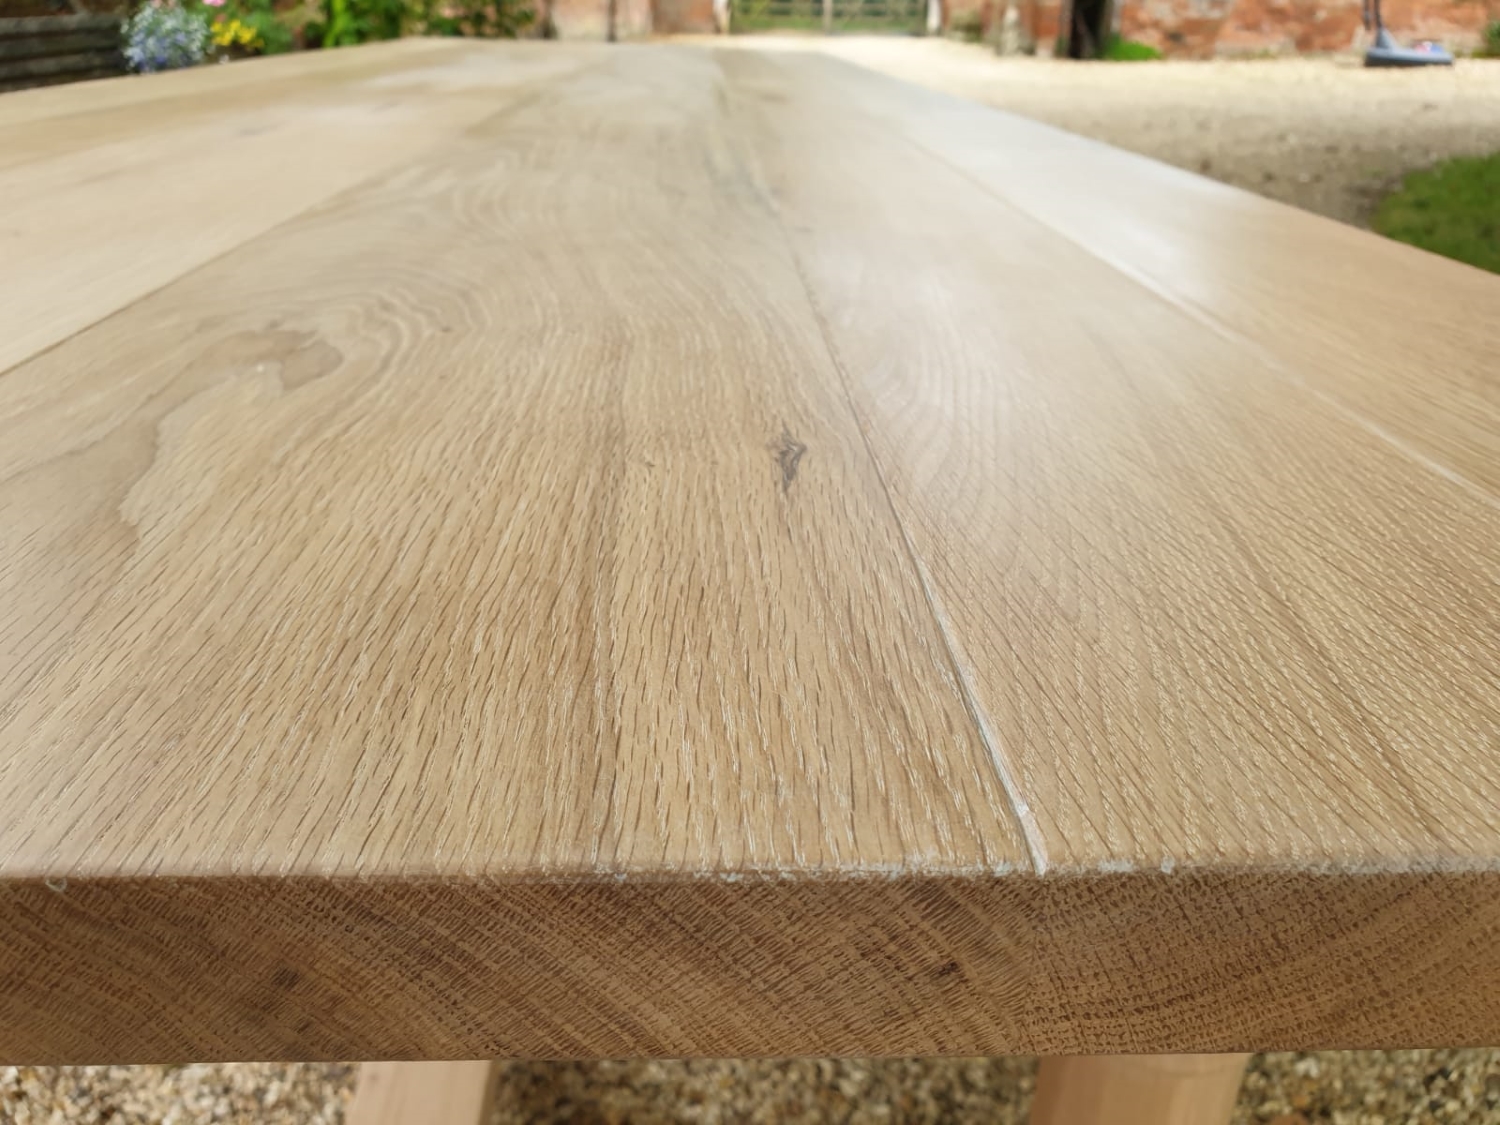 Solid Oak Refectory table